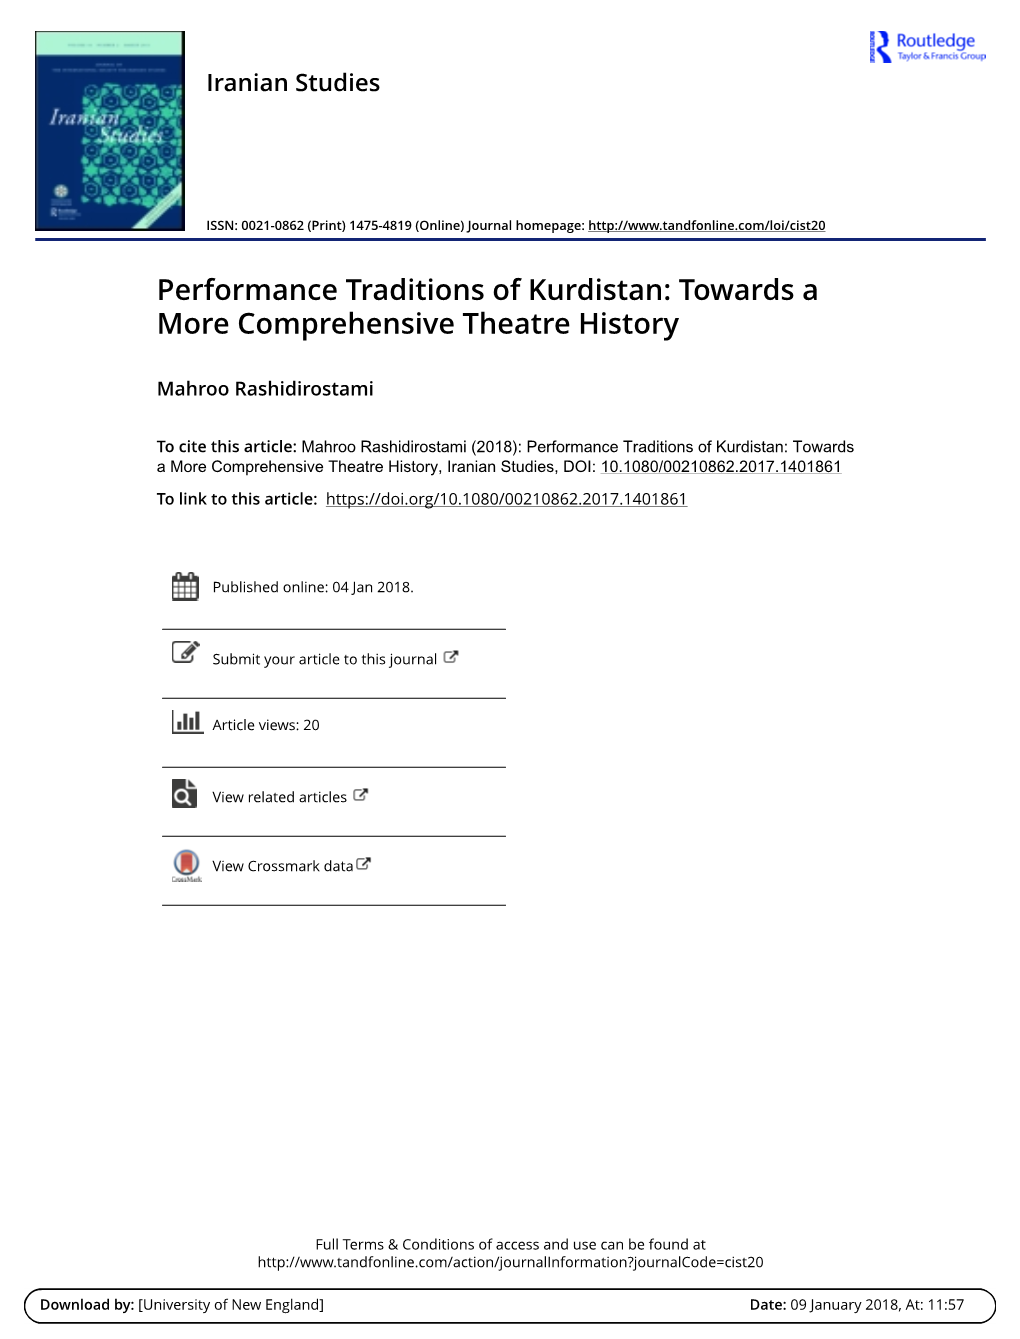 Performance Traditions of Kurdistan: Towards a More Comprehensive Theatre History